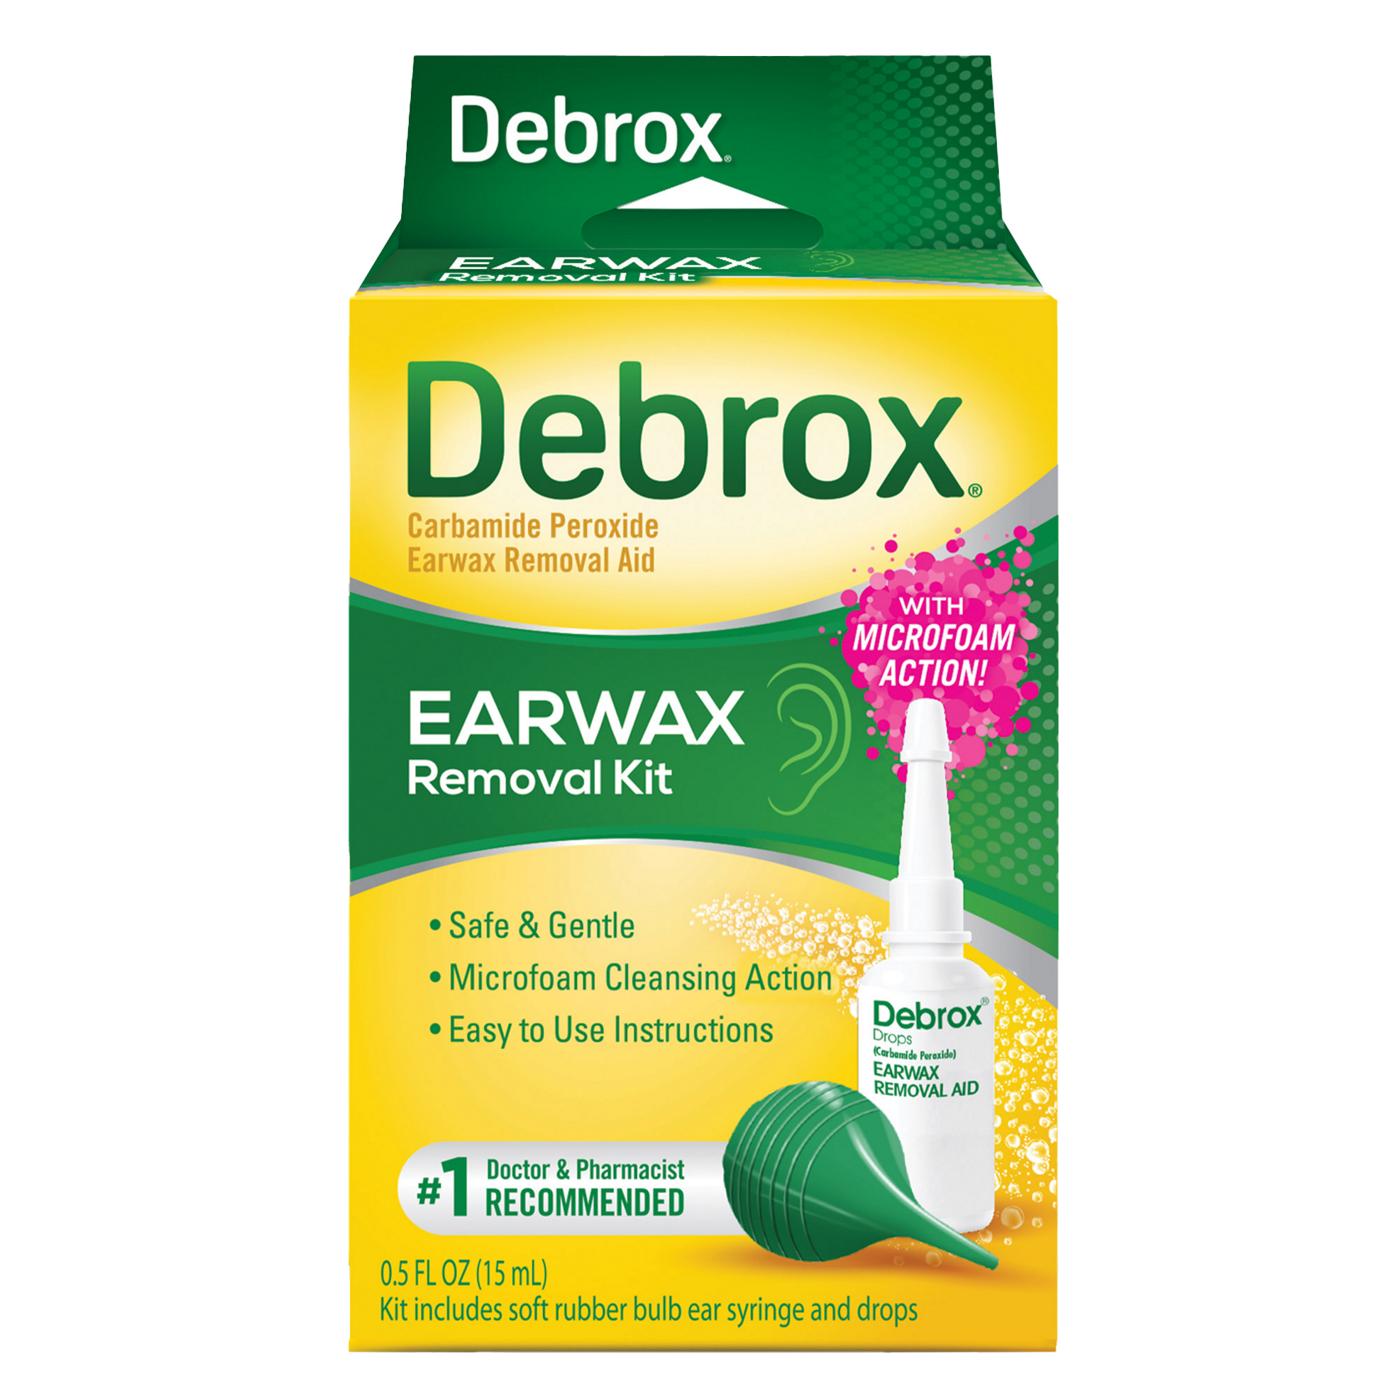 Debrox Earwax Removal Kit; image 1 of 5